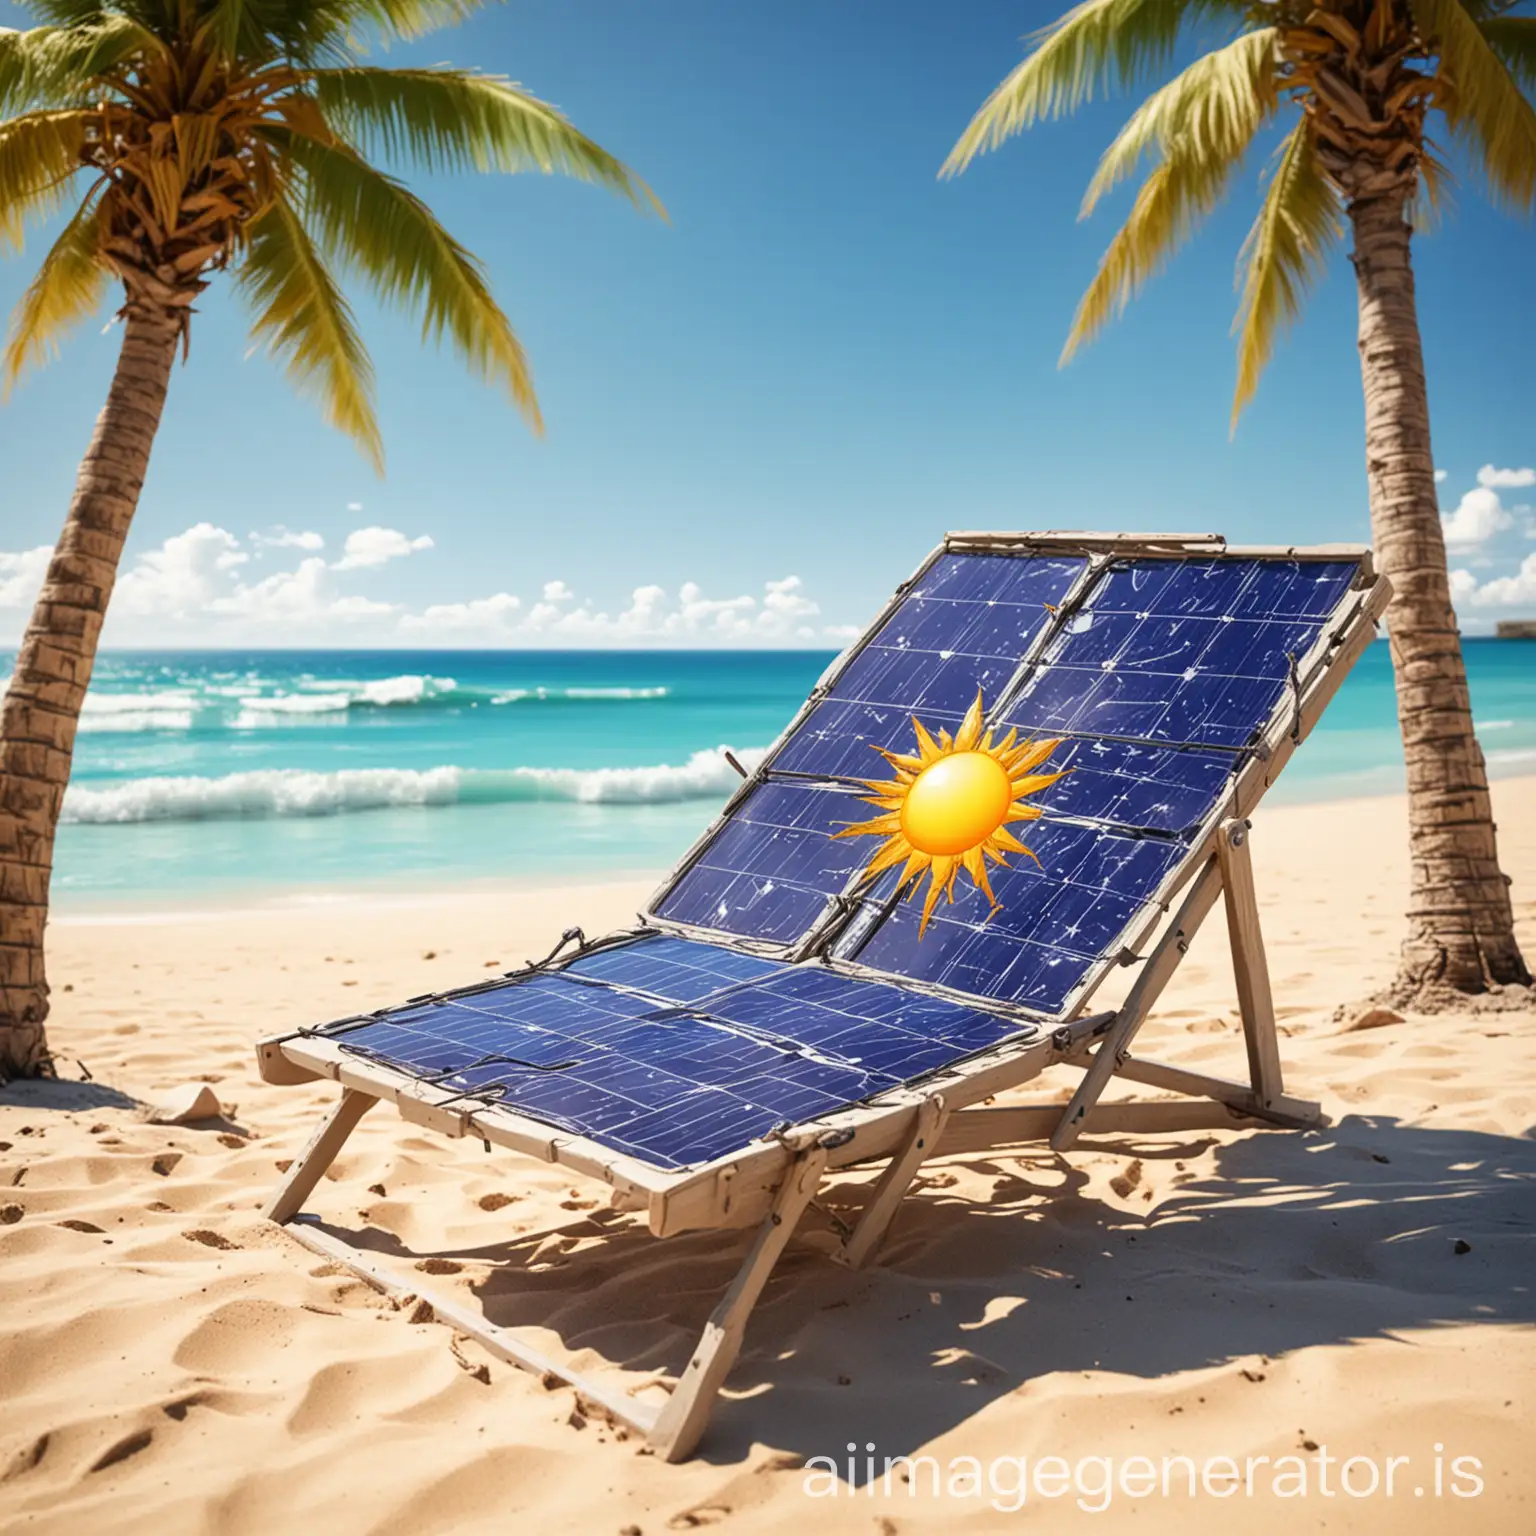 Illustrate a cartoon of a solar panel lying on a beach chair, wearing sunglasses, and sunbathing. The background should include a sunny beach with palm trees and a bright blue sky.